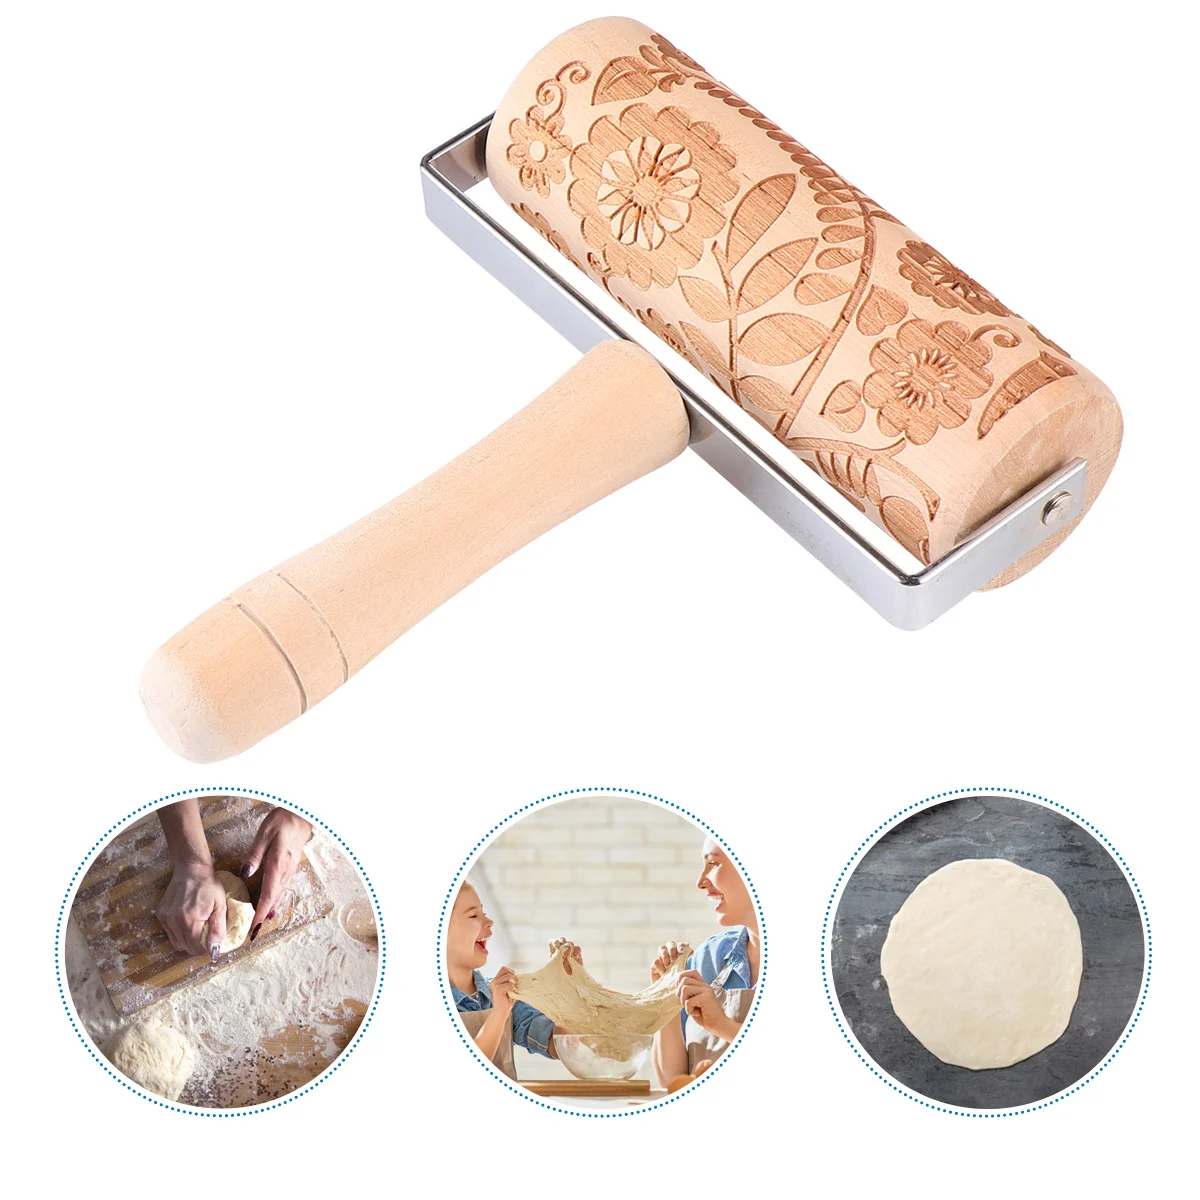 

Roller Rolling Pin Wood Fondant Pastry Tools Bakery Kitchen Pizza Pie Christmas Lattice Doughembossing Engraved Decor